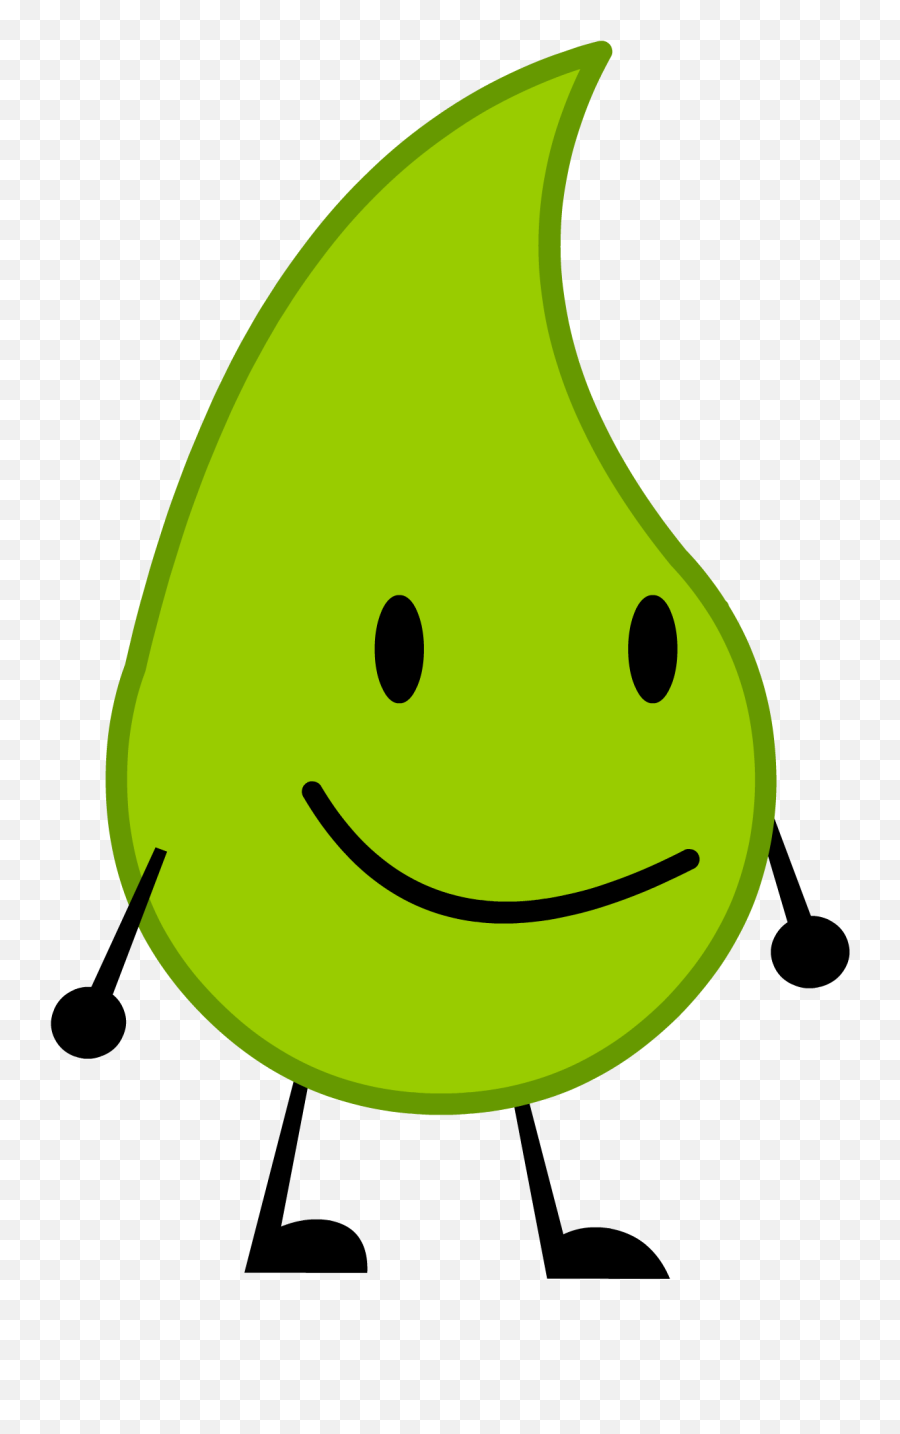 Battle For Dream Island Wiki - Bfdi Teardrop, clipart, transparent, png,  images, Download